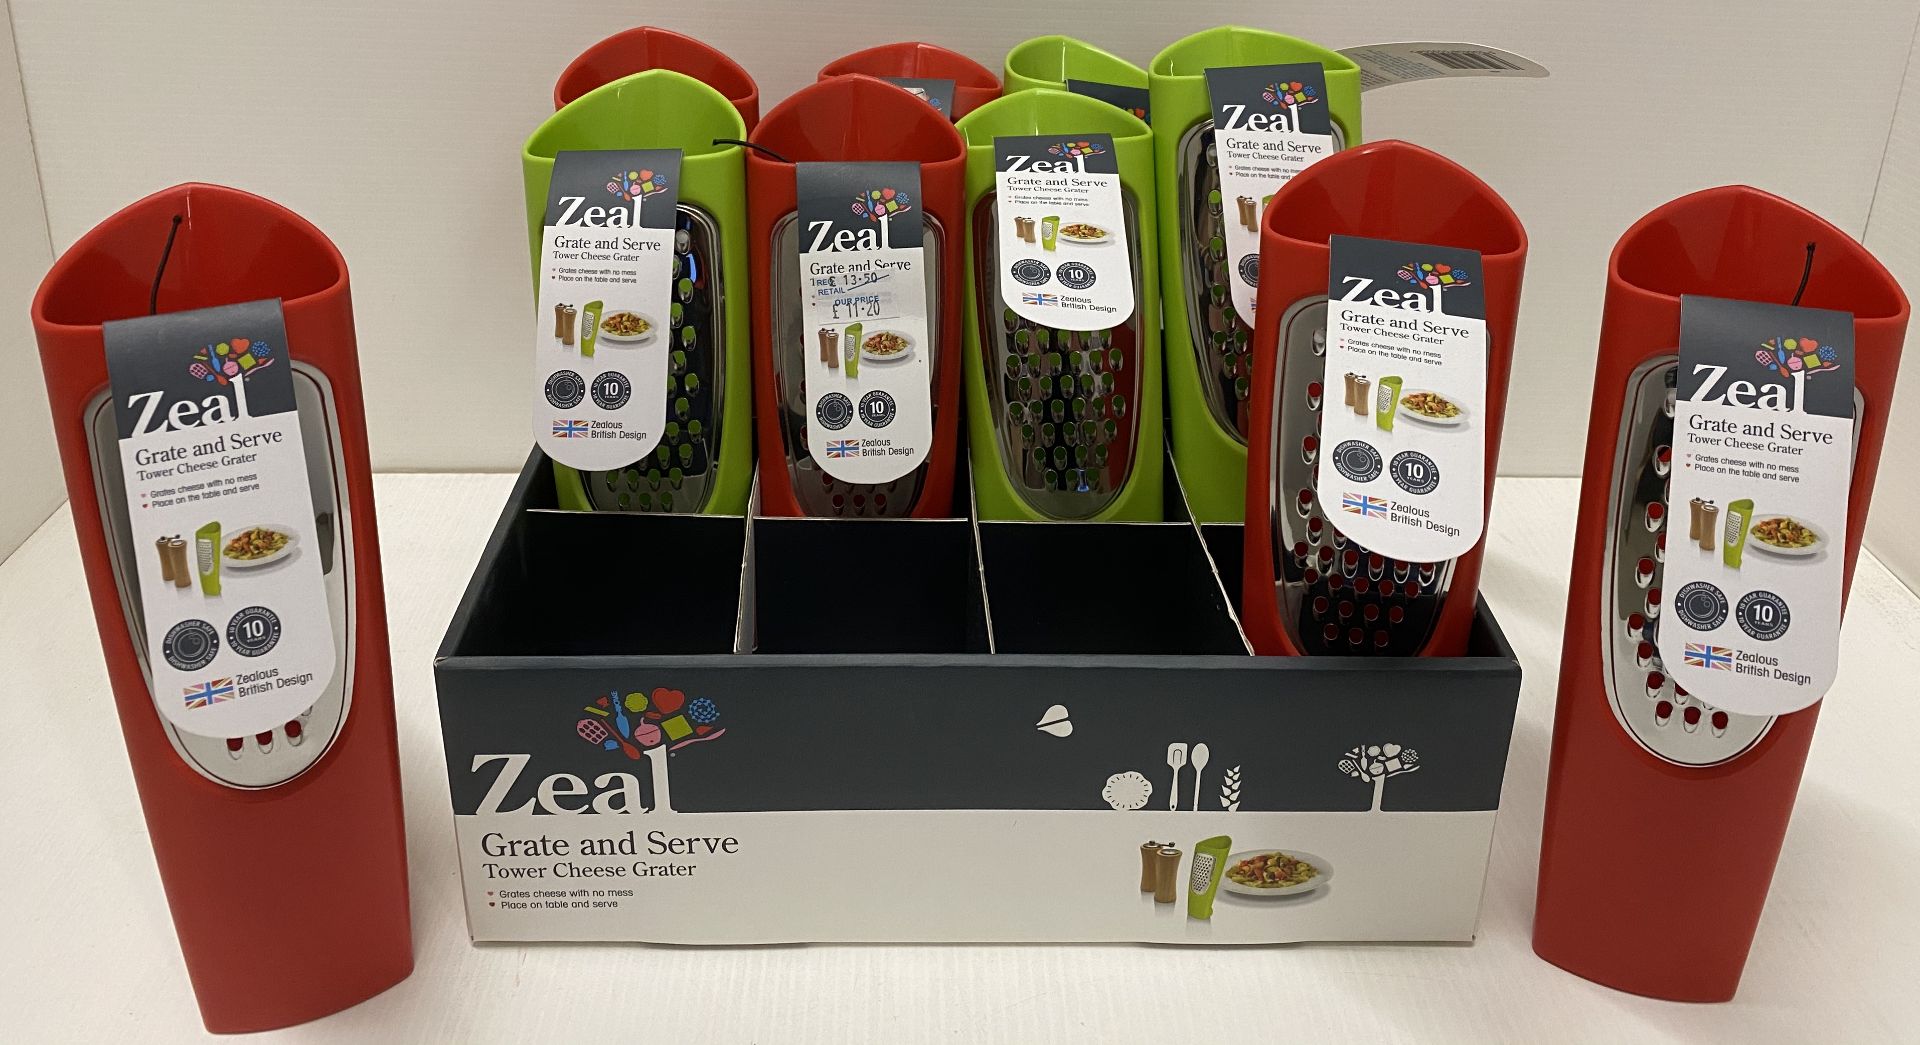 11 x Zeal kitchen accessories - Grate and serve tower cheese graters RRP £13.